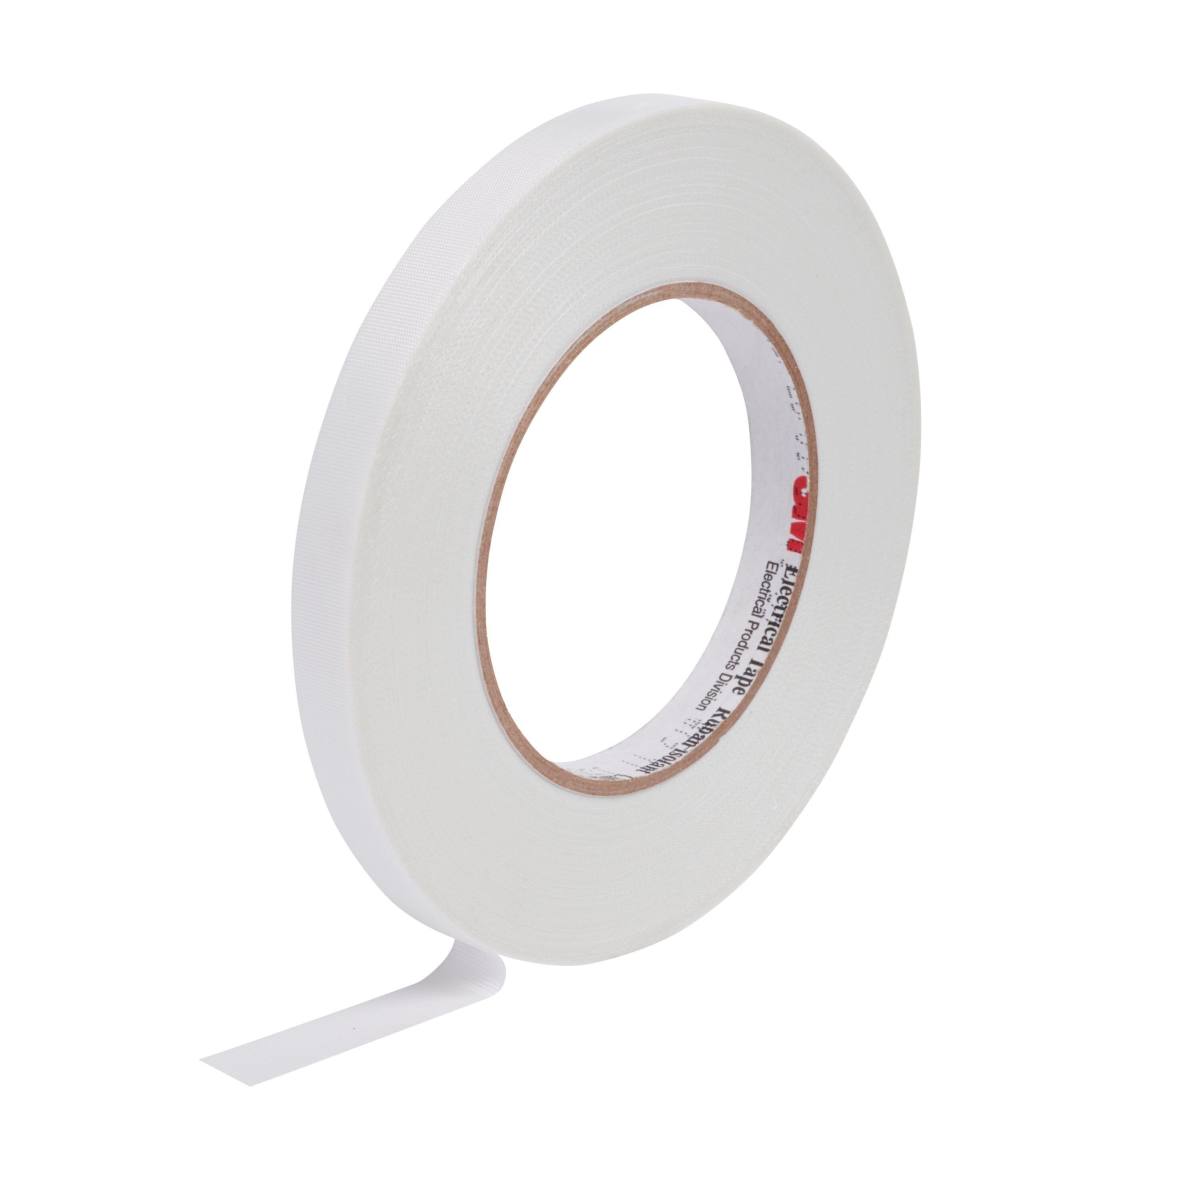 3M ET 79 Glasweefselband, wit, 50 mm x 55 m x 0,18 mm